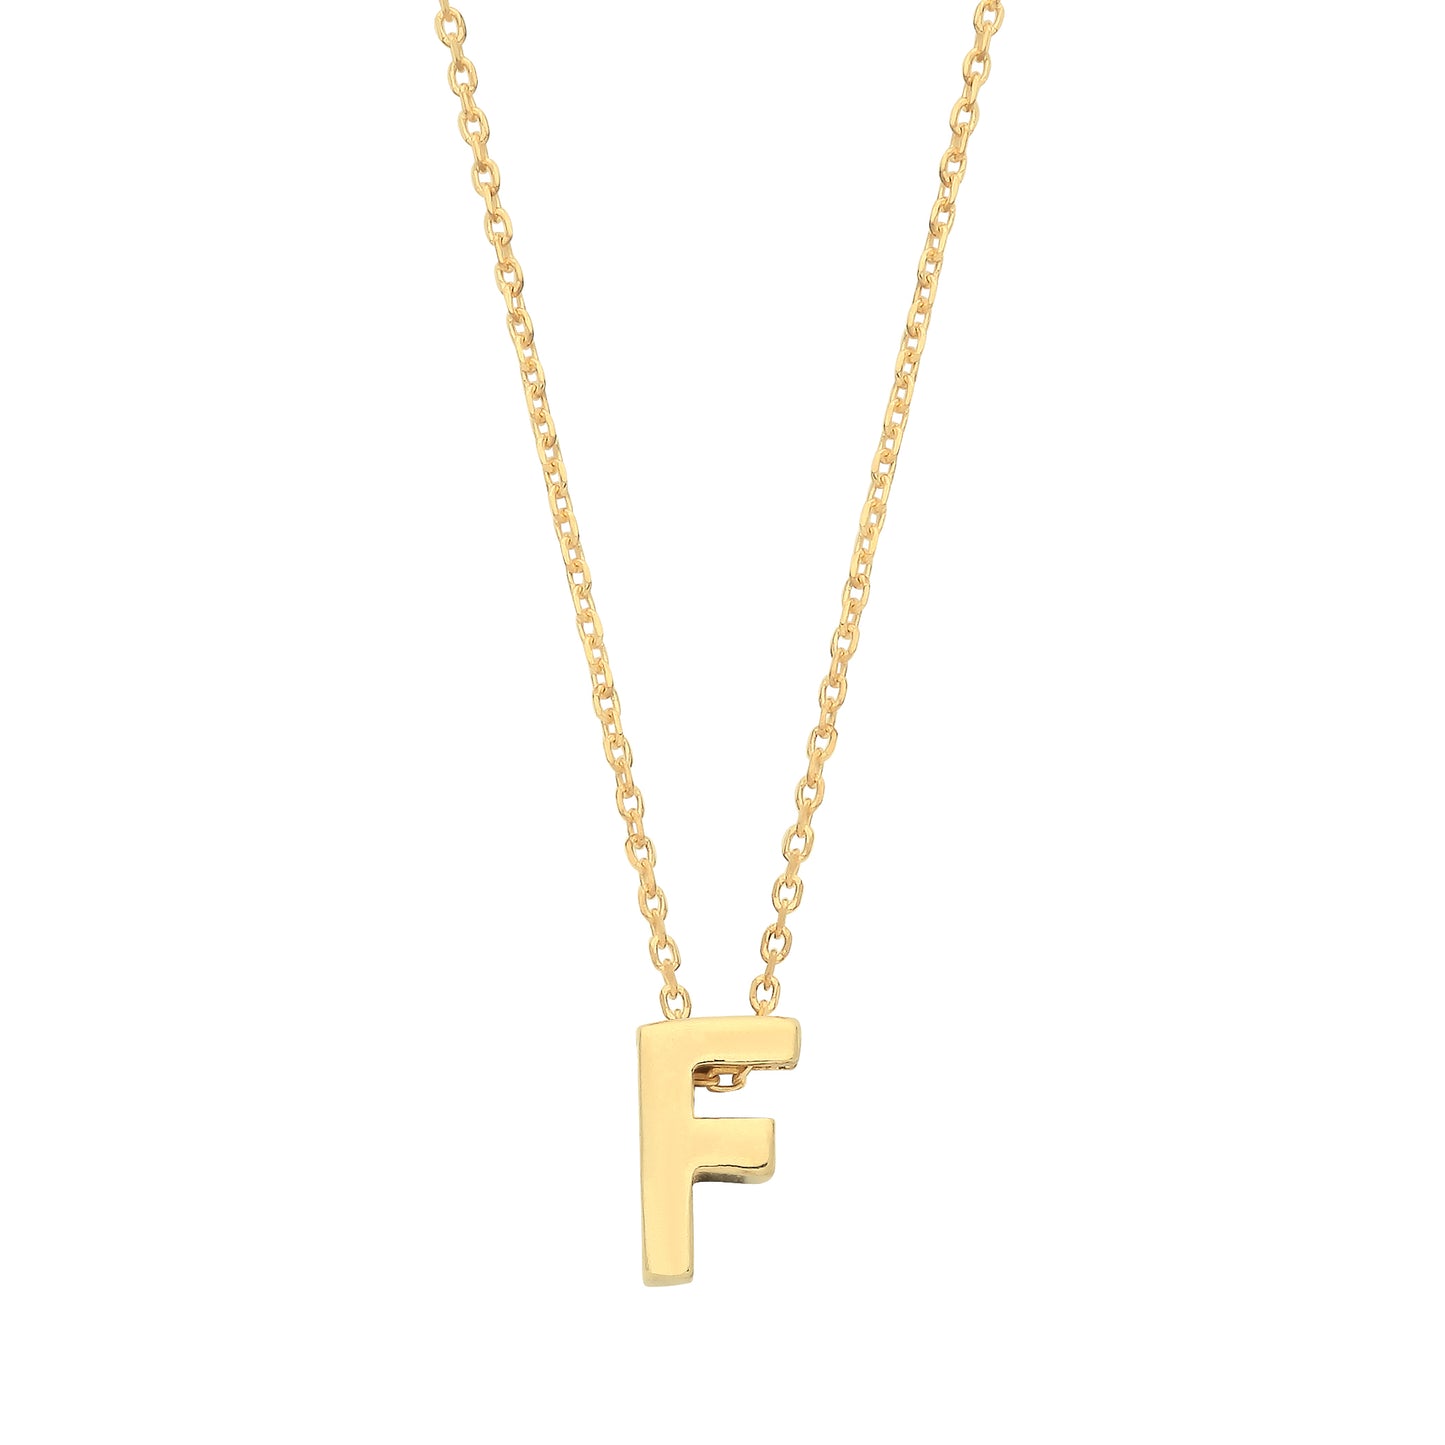 9ct Gold  Letter F Initial Pendant Necklace 17 inch 43cm - G9P6032F